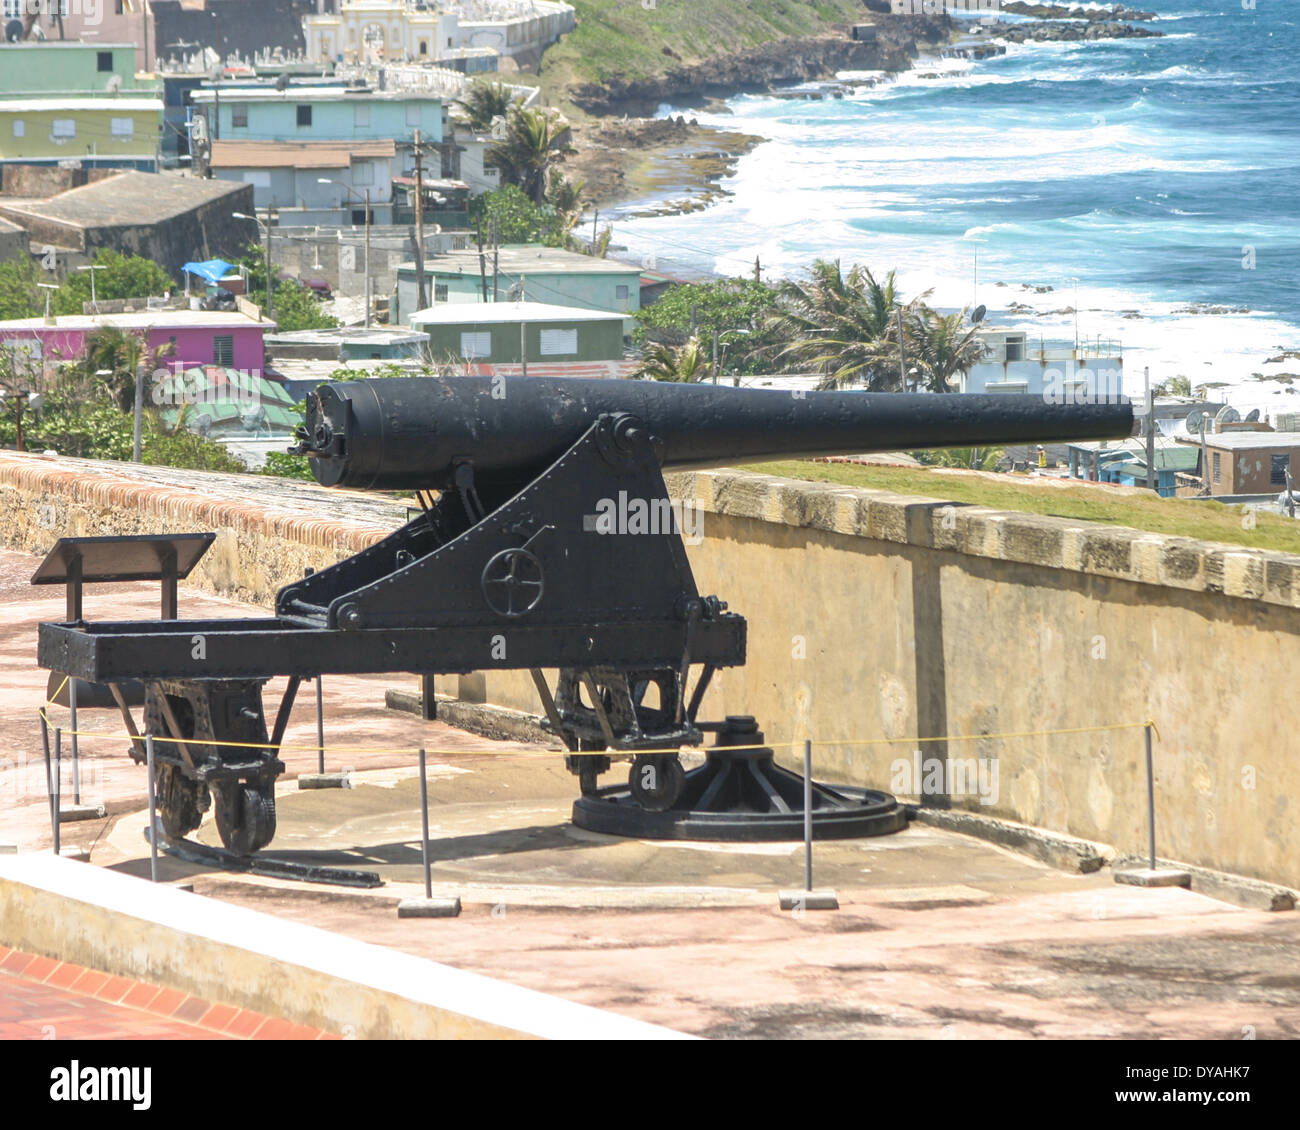 San Juan, Puerto Rico, US. 28th Mar, 2005. A 15cm (6'') OrdÃ³Ã±ez cannon on the north battery wall of the 18th Century Spanish fort, Castillo de San CristÃ³bal (San CristÃ³bal Castle), it saw action during the Spanish-American War. Part of the San Juan National Historic Site and a United Nations World Heritage Site in El Viejo San Juan (Old San Juan), it was the the largest fortification built by the Spanish in the New World when it was finished in 1783, covering 27 acres. © Arnold Drapkin/ZUMAPRESS.com/Alamy Live News Stock Photo